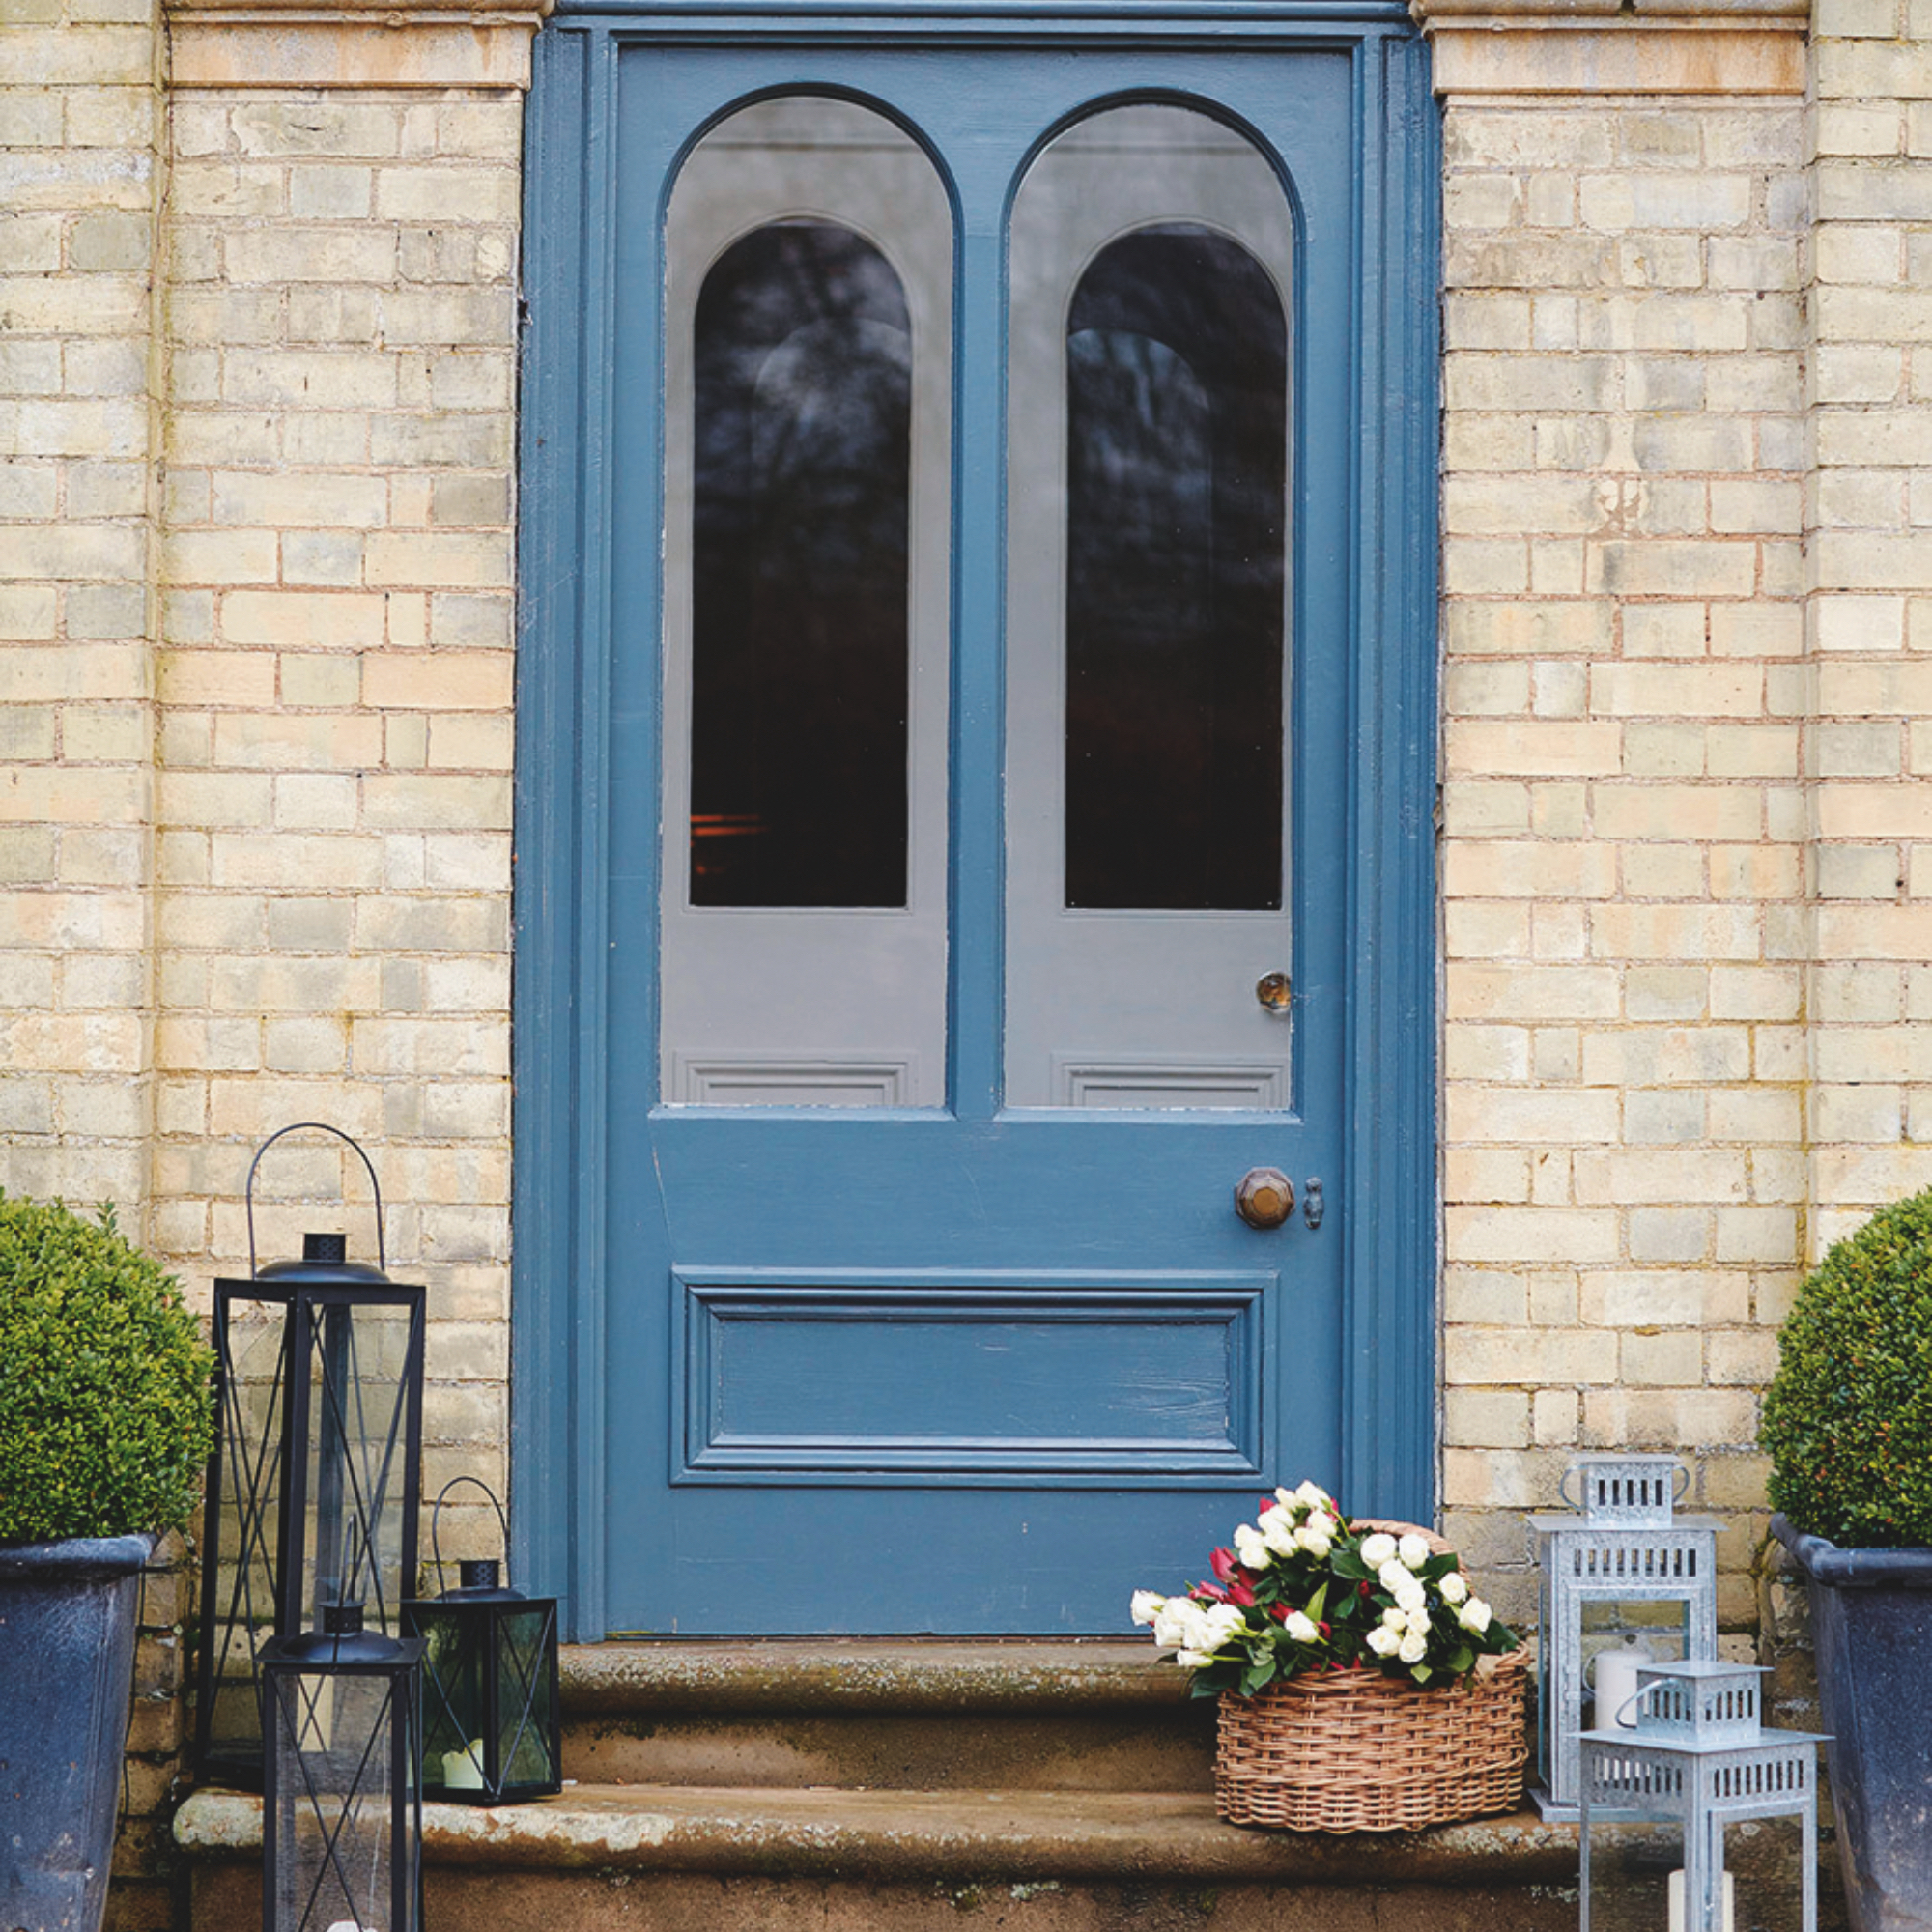 small front porch ideas, blue door with double doors in porch, basket of tulips, lanterns on steps